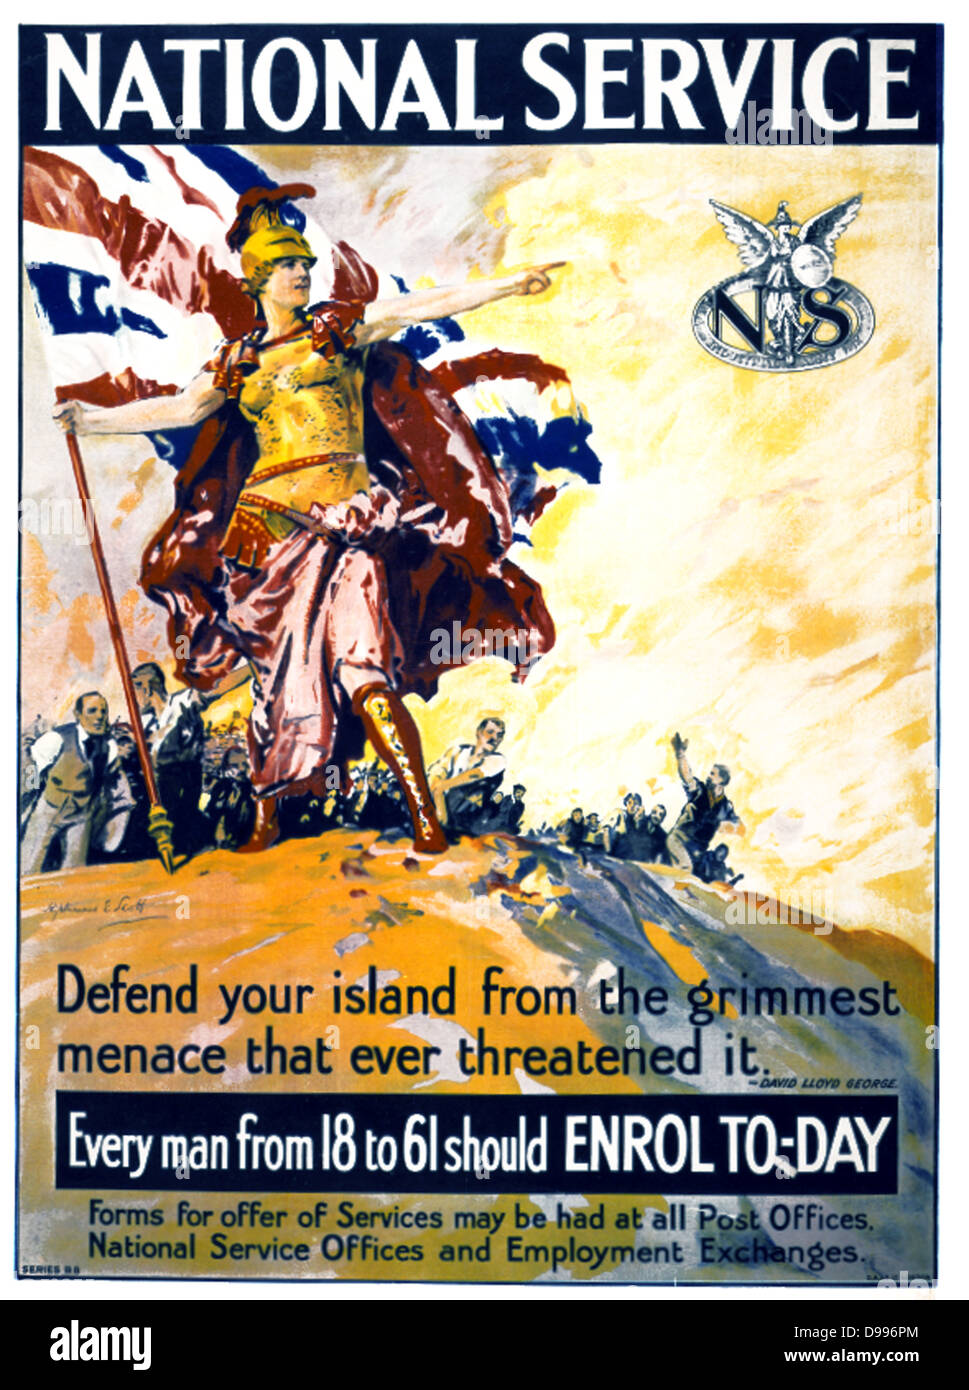 - First world recruitment war poster images Alamy stock hi-res photography and